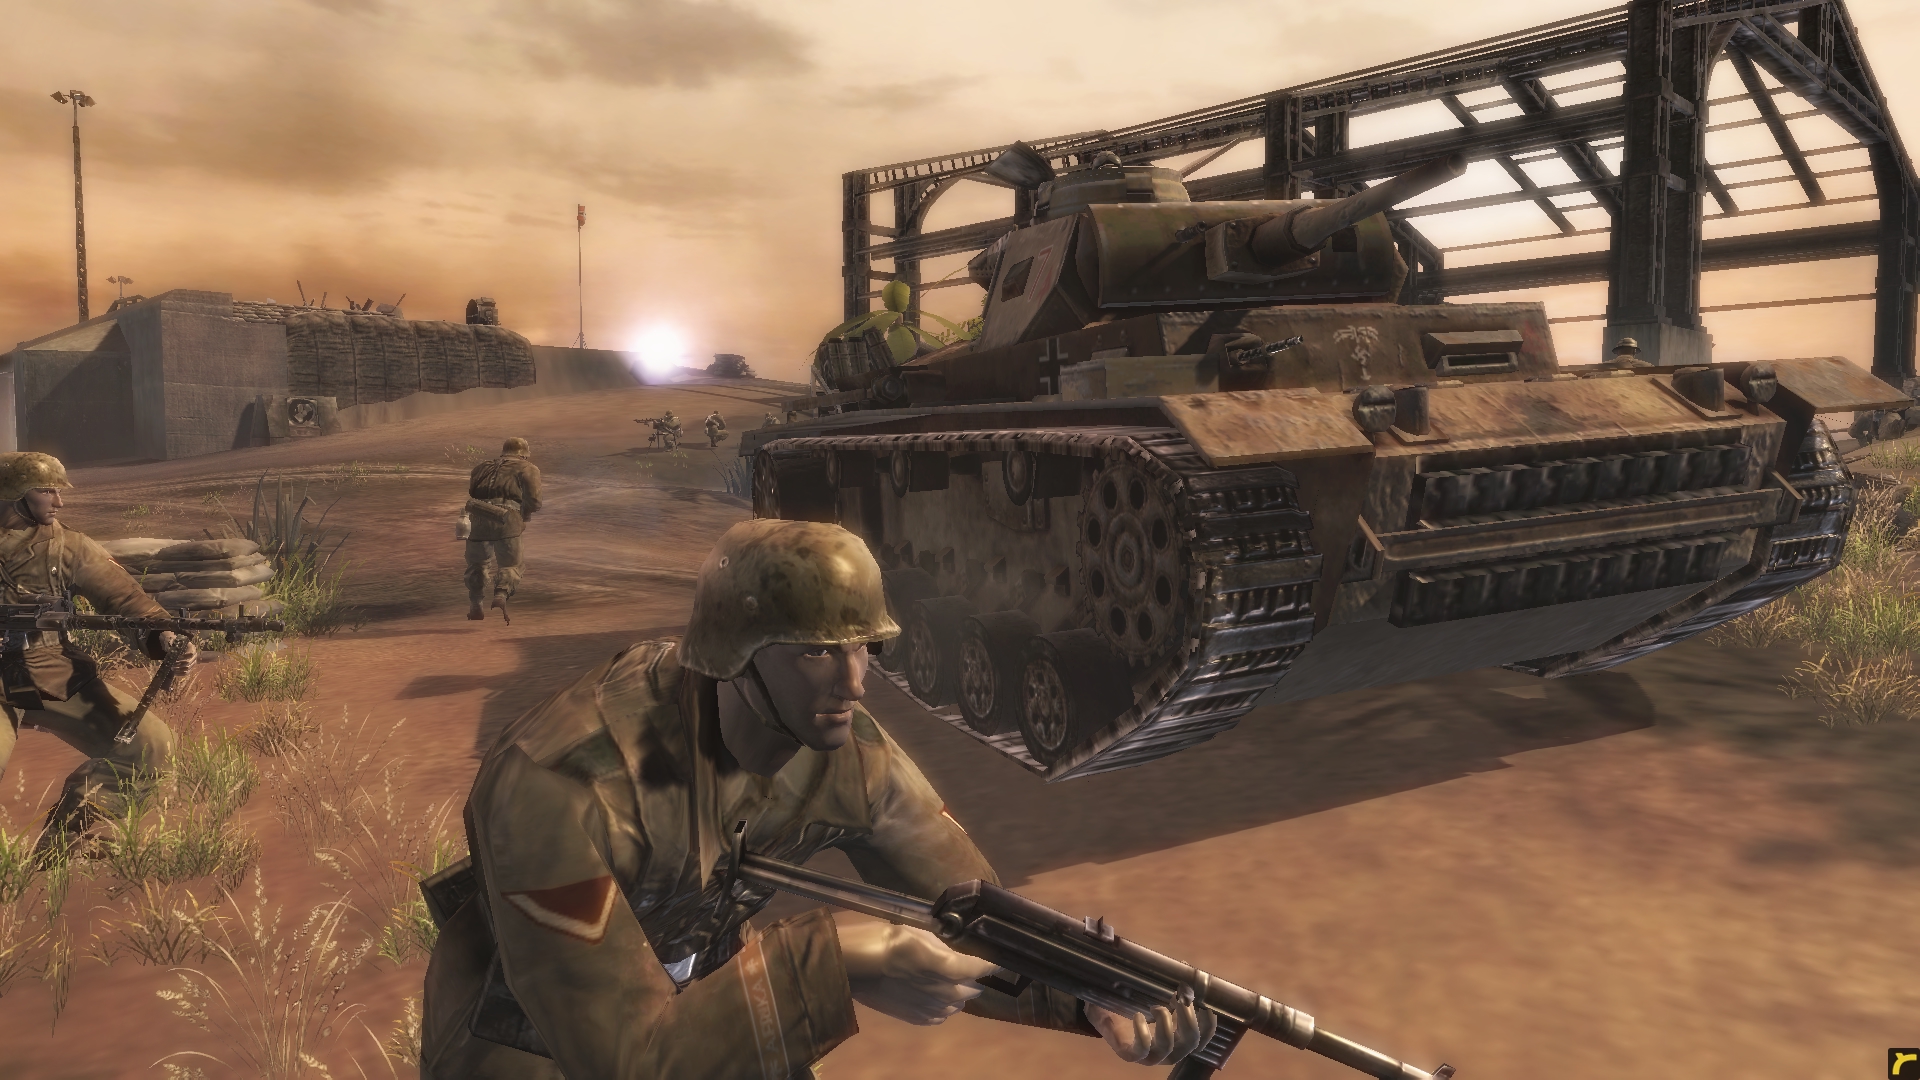 Company of heroes full patch